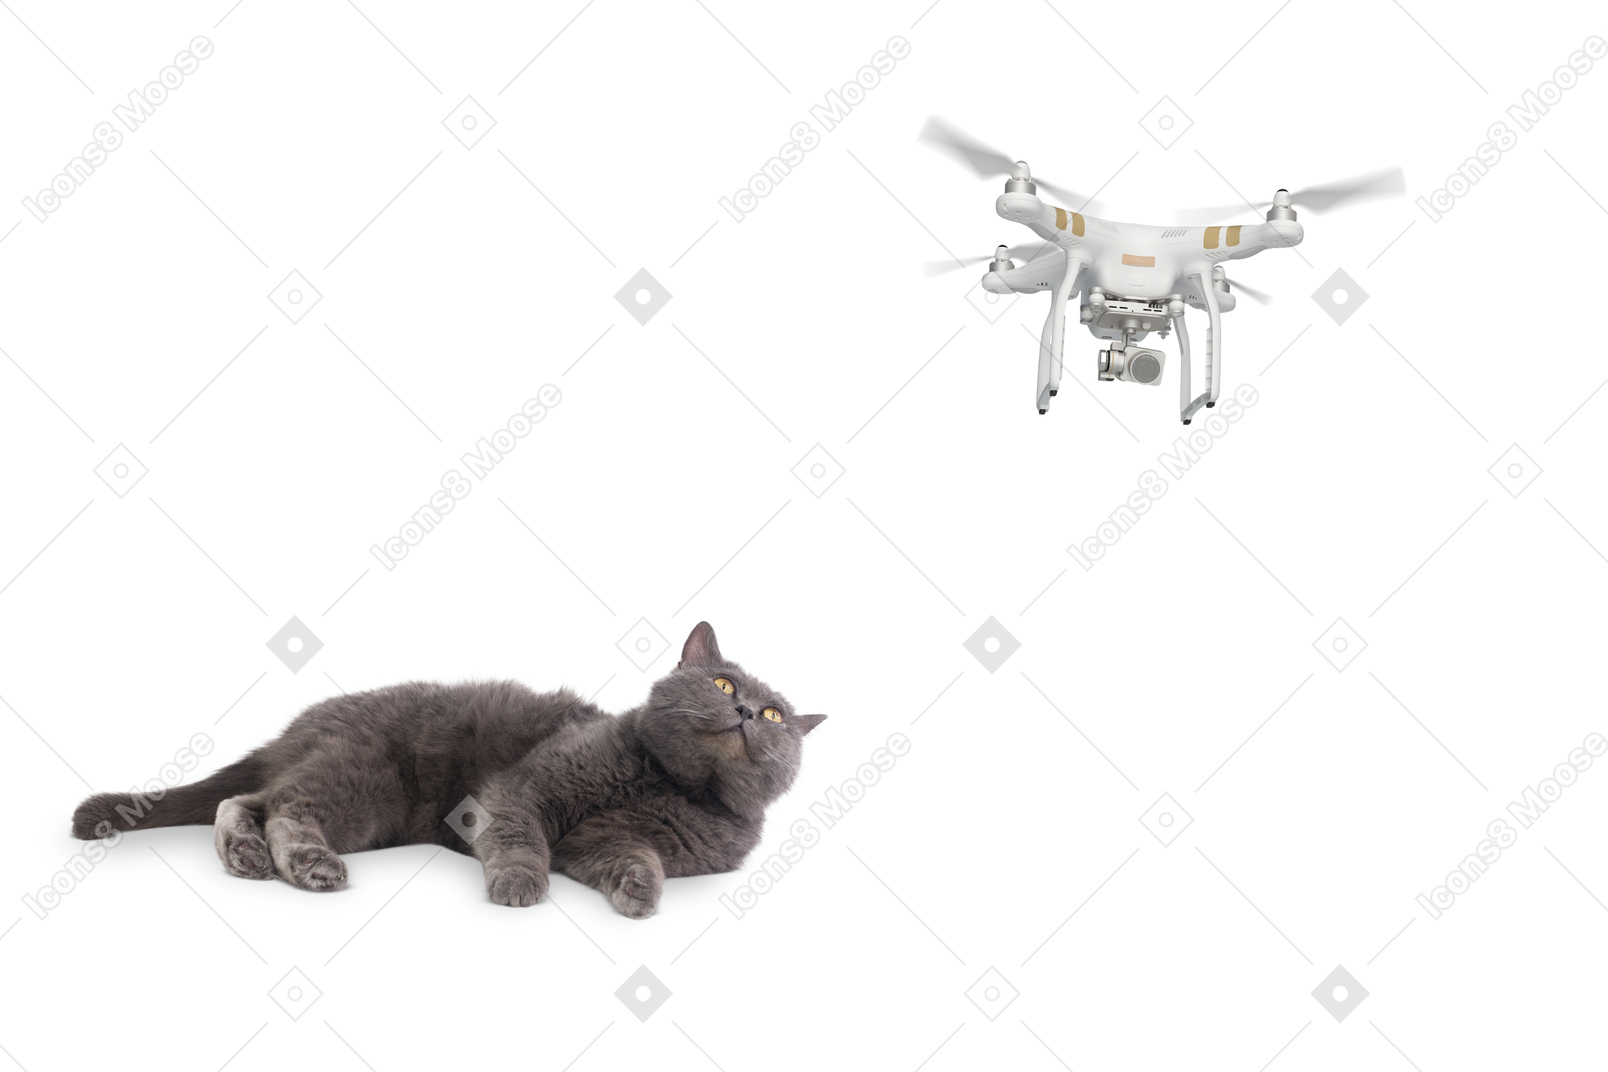 Grumpy cat watching a flying drone